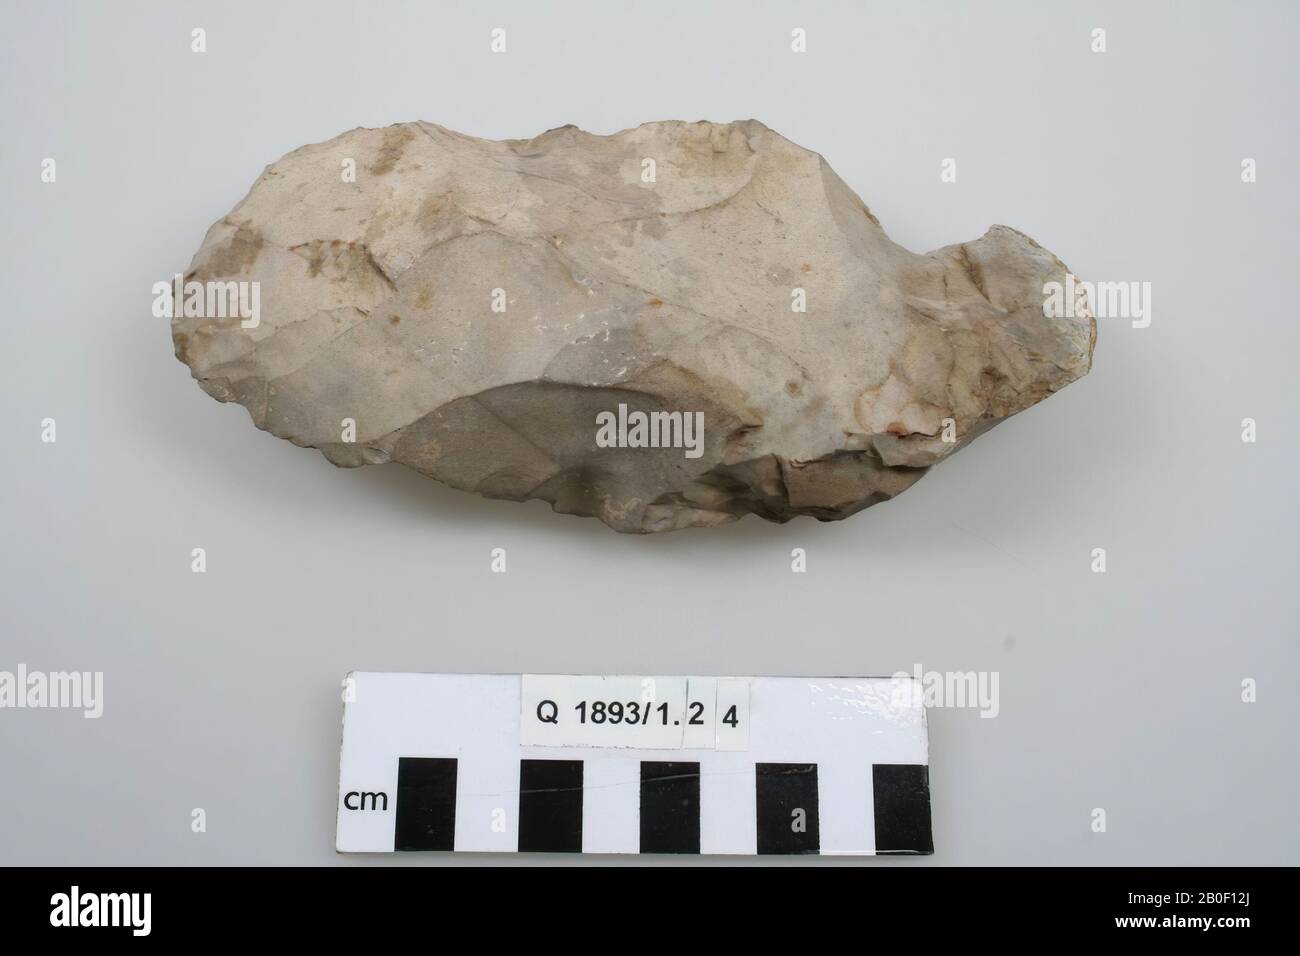 Flint tool, rough-worked ax or flint nucleus., Tool, stone, flint, 17 x 7.6 x 3.8 cm, prehistory, Belgium, unknown, unknown, App-le-grand Stock Photo